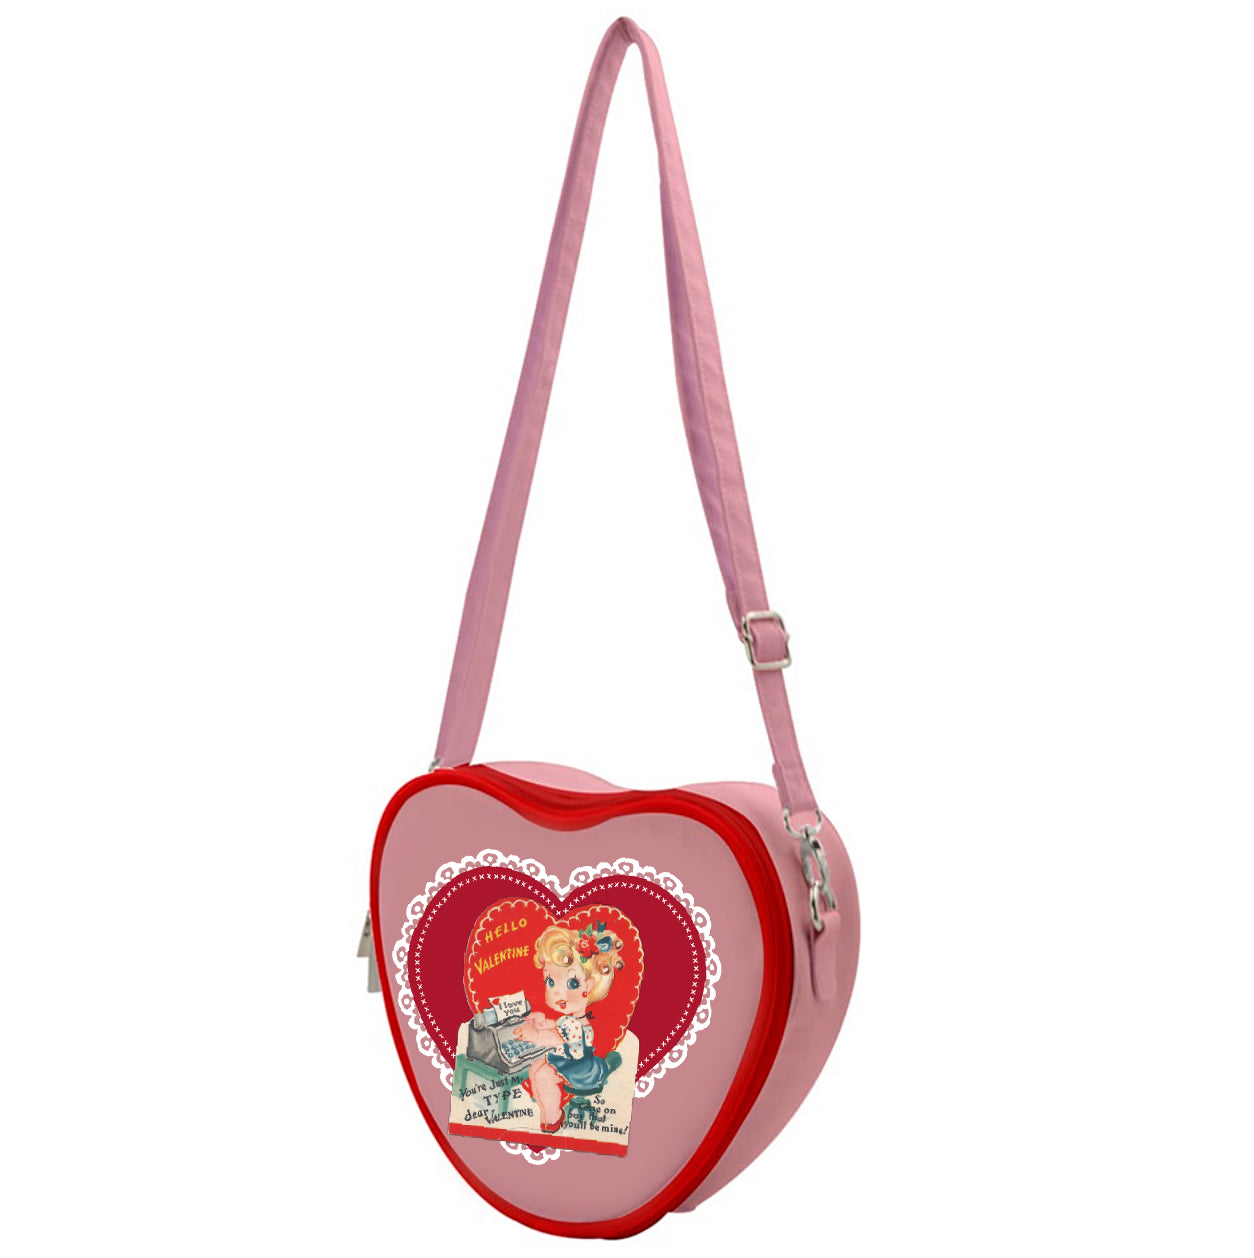 You're Just My Type Heart Purse